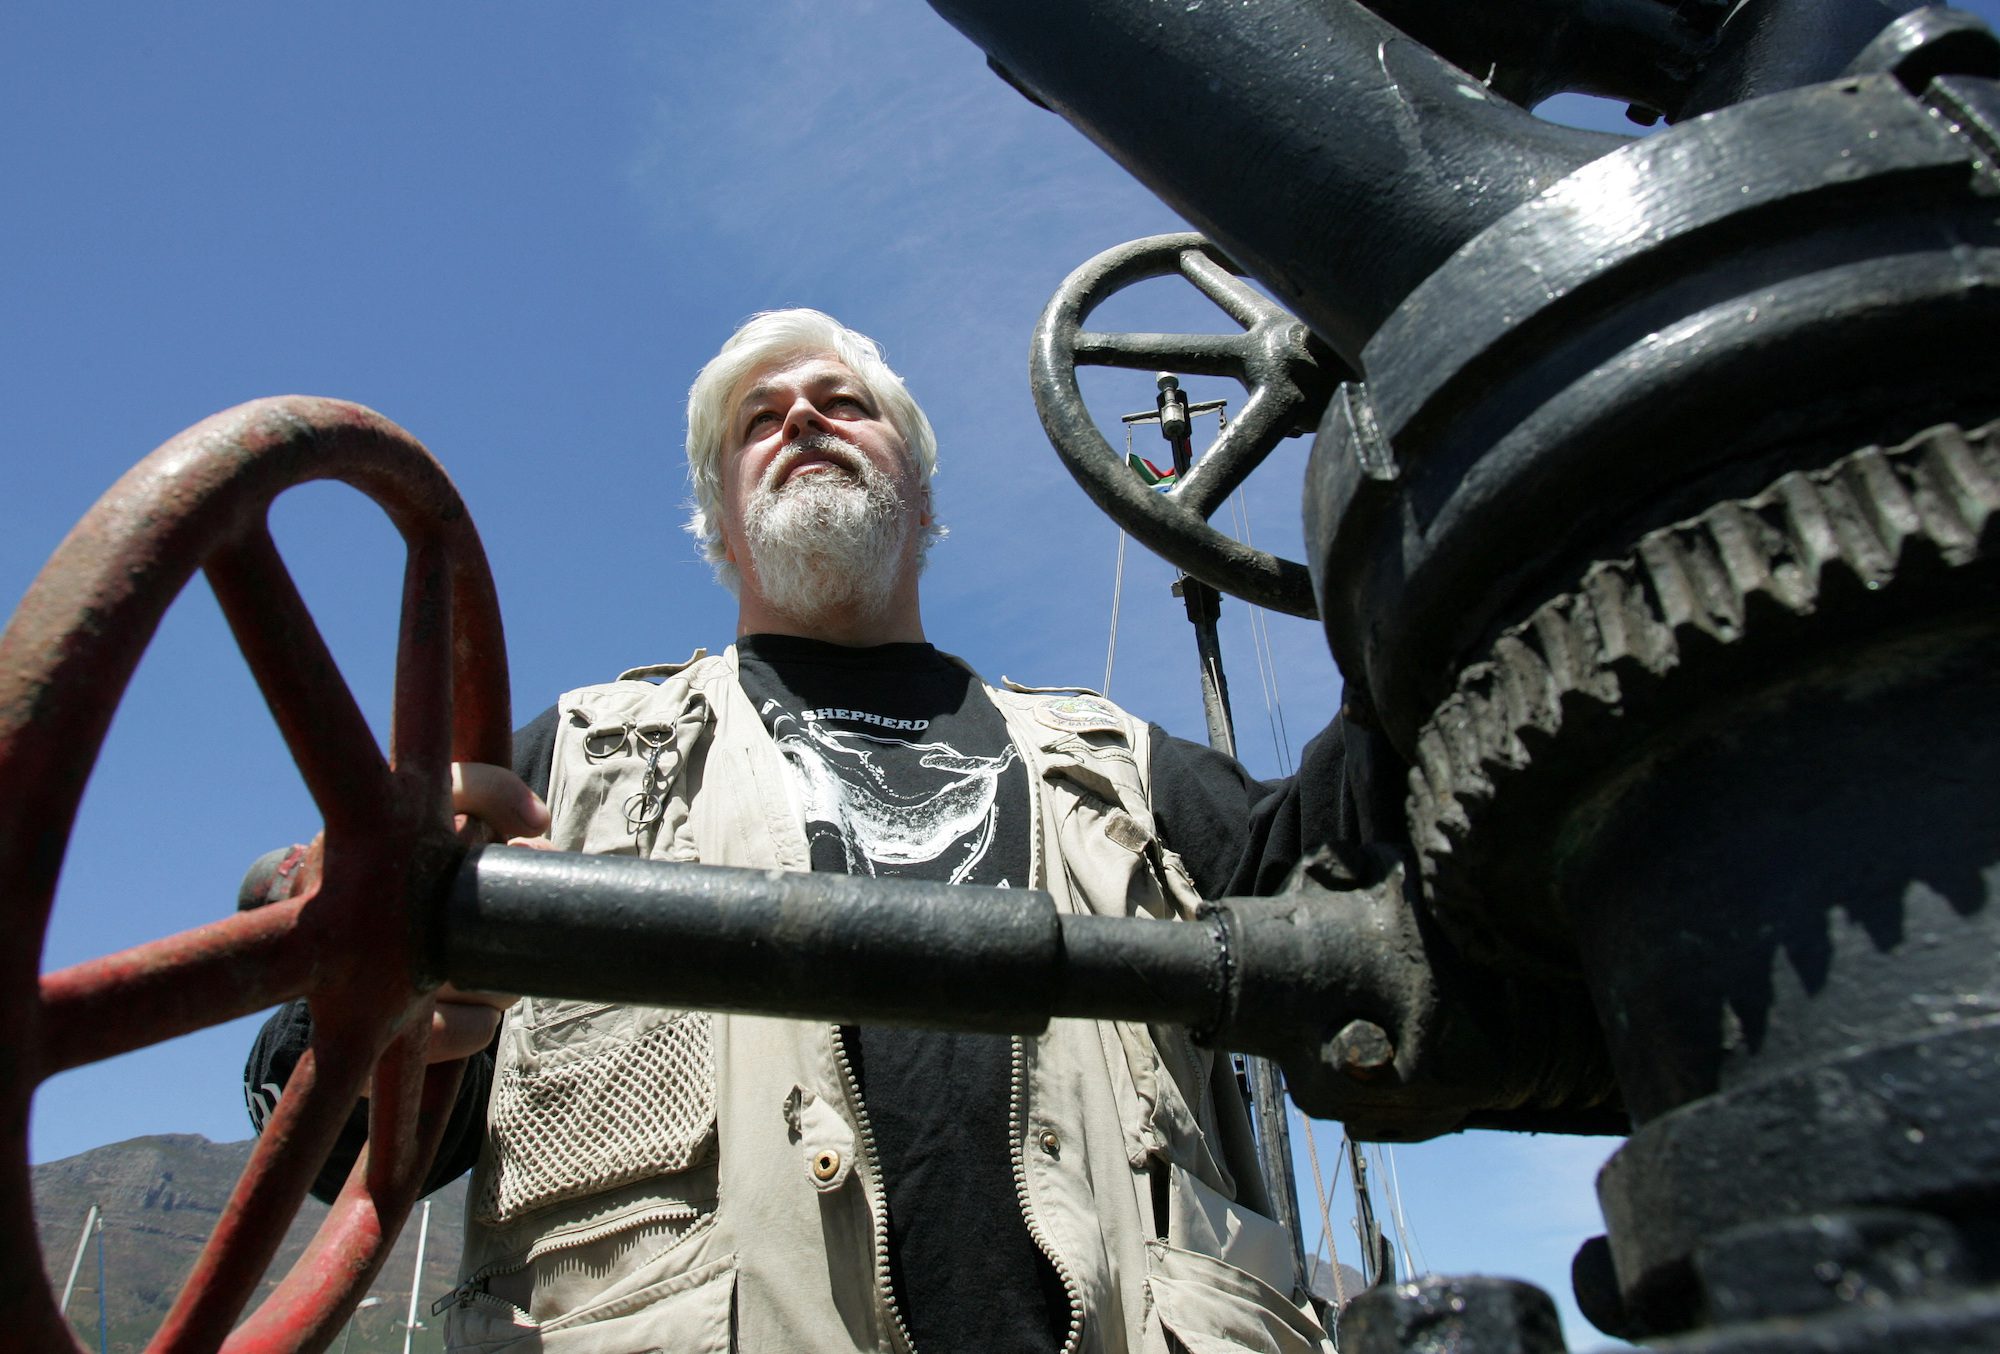 FILE PHOTO: Canadian Paul Watson, the captain of the anti-whaling ship the Farley Mowat, stands on the deck of the boat in Cape Town, South Africa January 30, 2006. REUTERS/Howard Burditt/File Photo